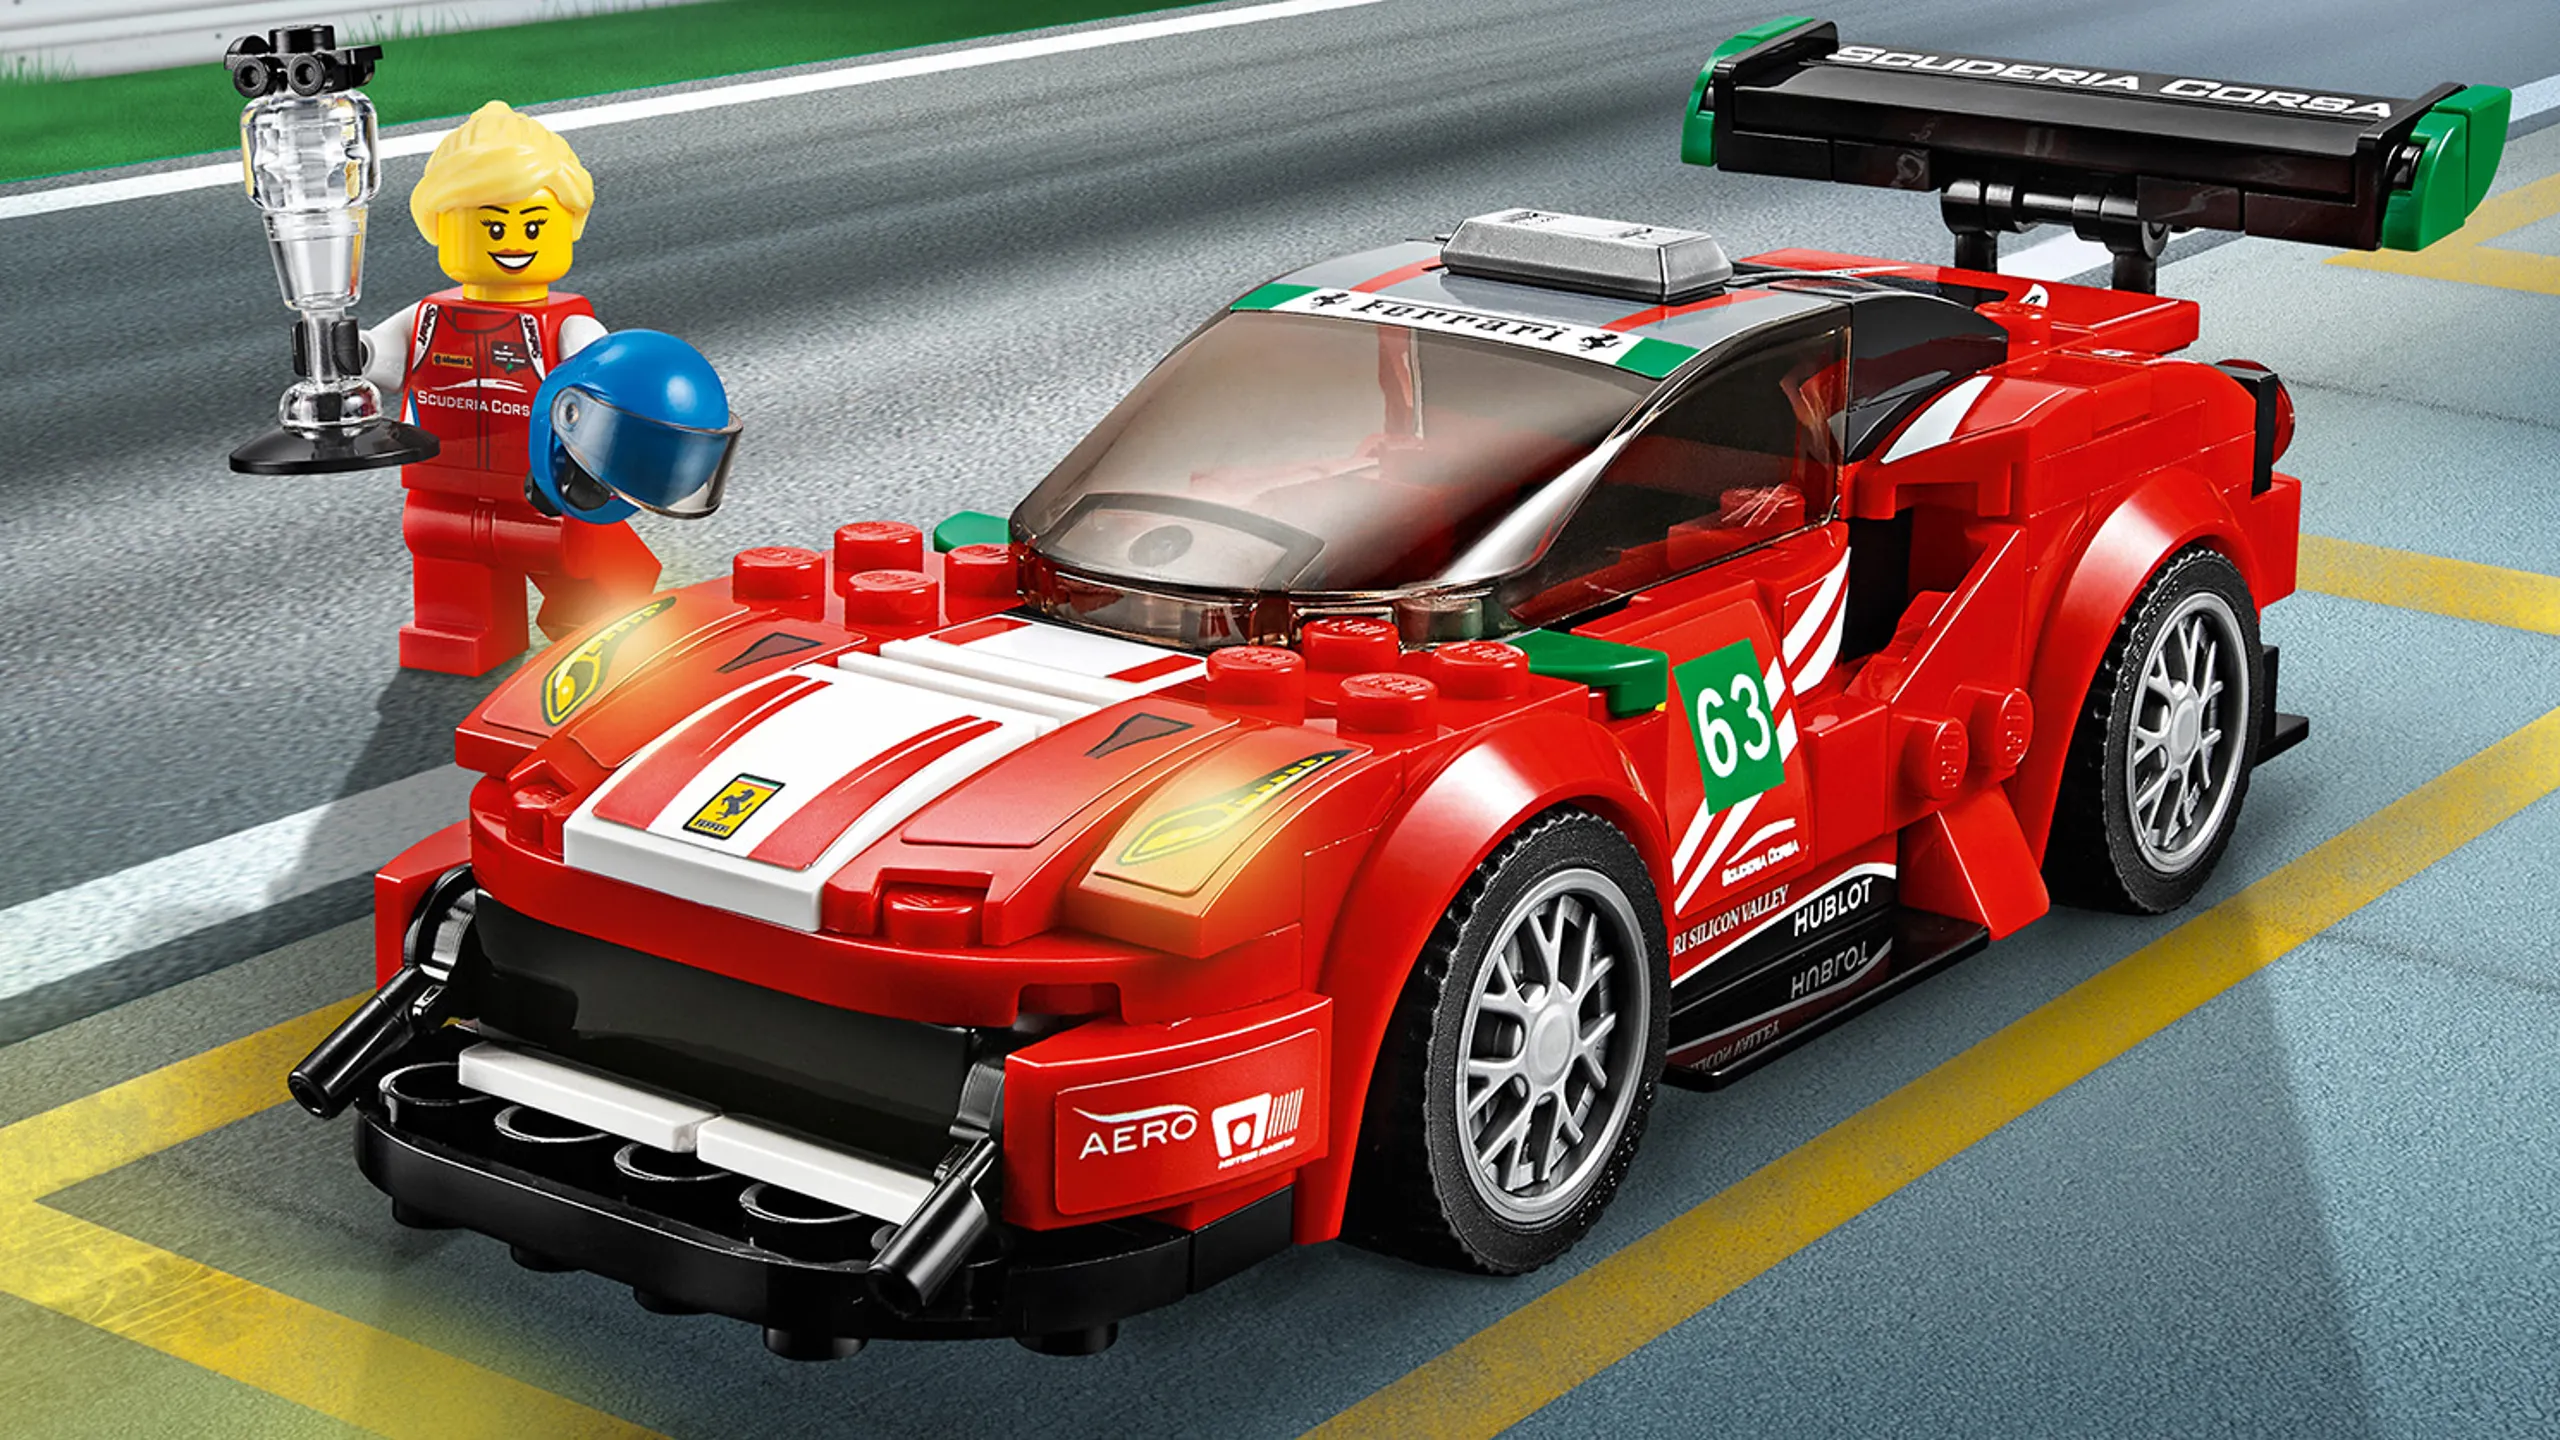 LEGO Speed Champions - 75886 Ferrari 488 GT3 "Scuderia Corsa" -  Build this super sports car, place the driver in the cockpit and show off your racing skills